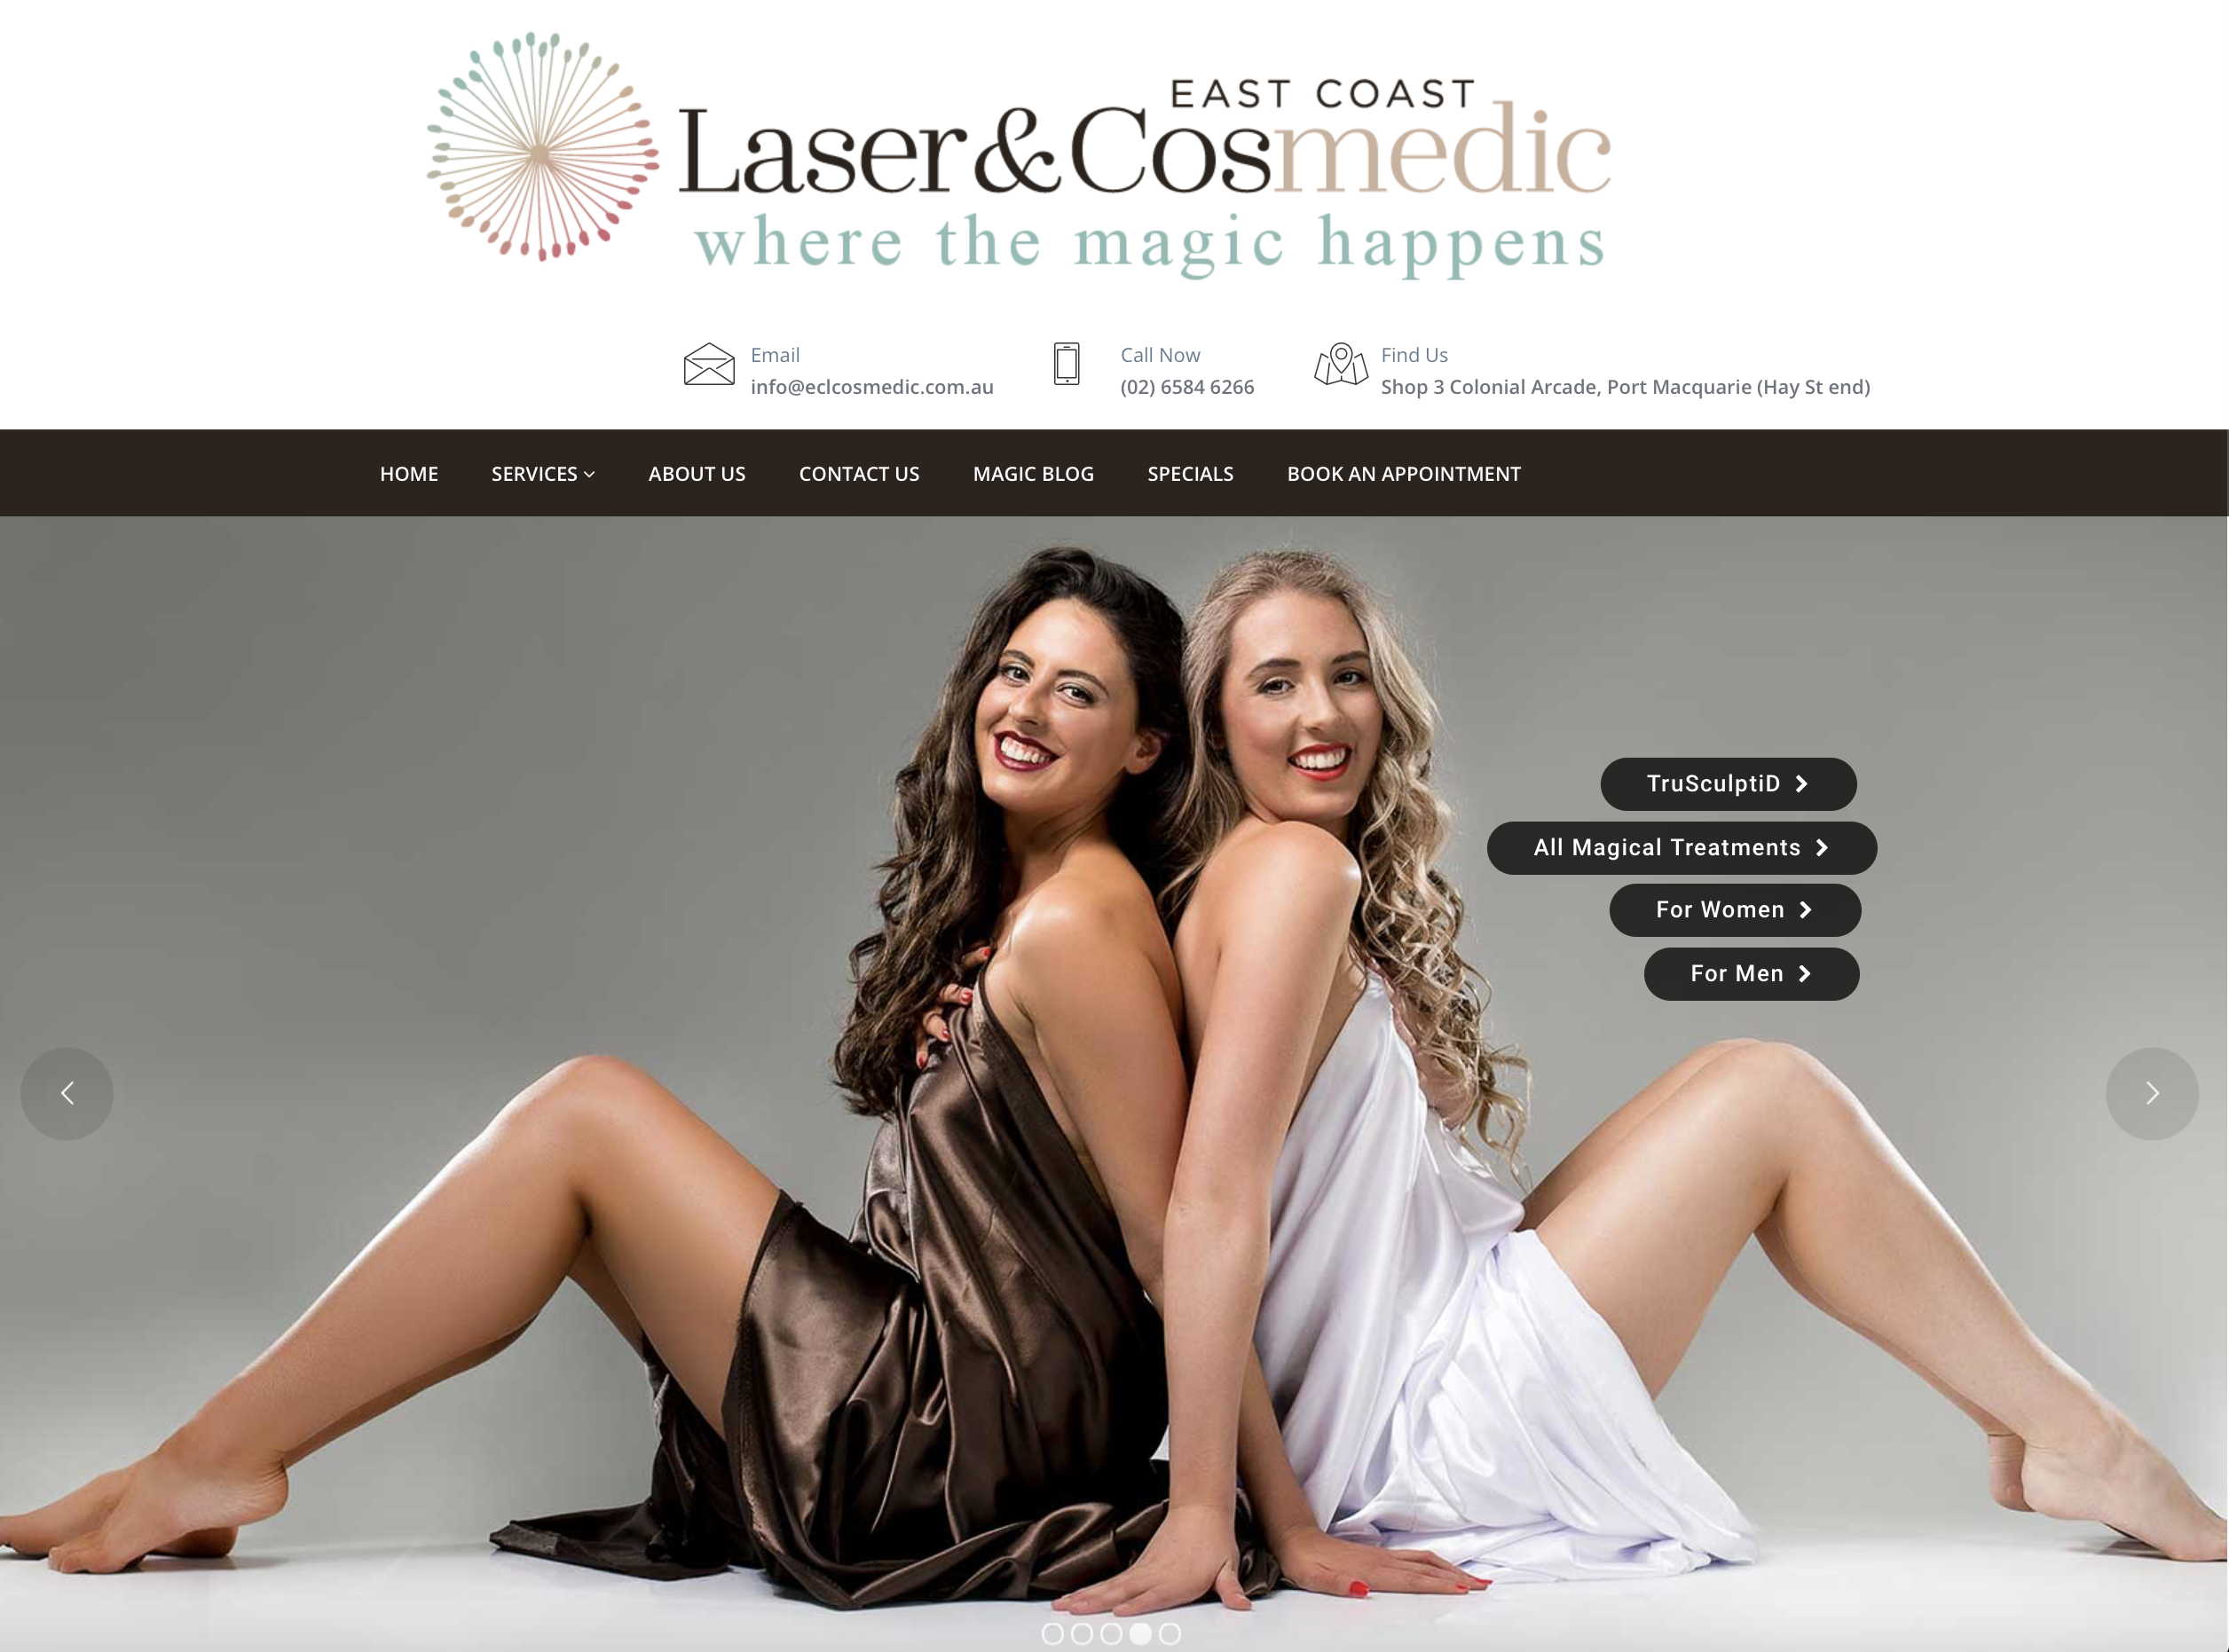 Another engaging website by Vermilion Pinstripes | East Coast Laser & Cosmedic